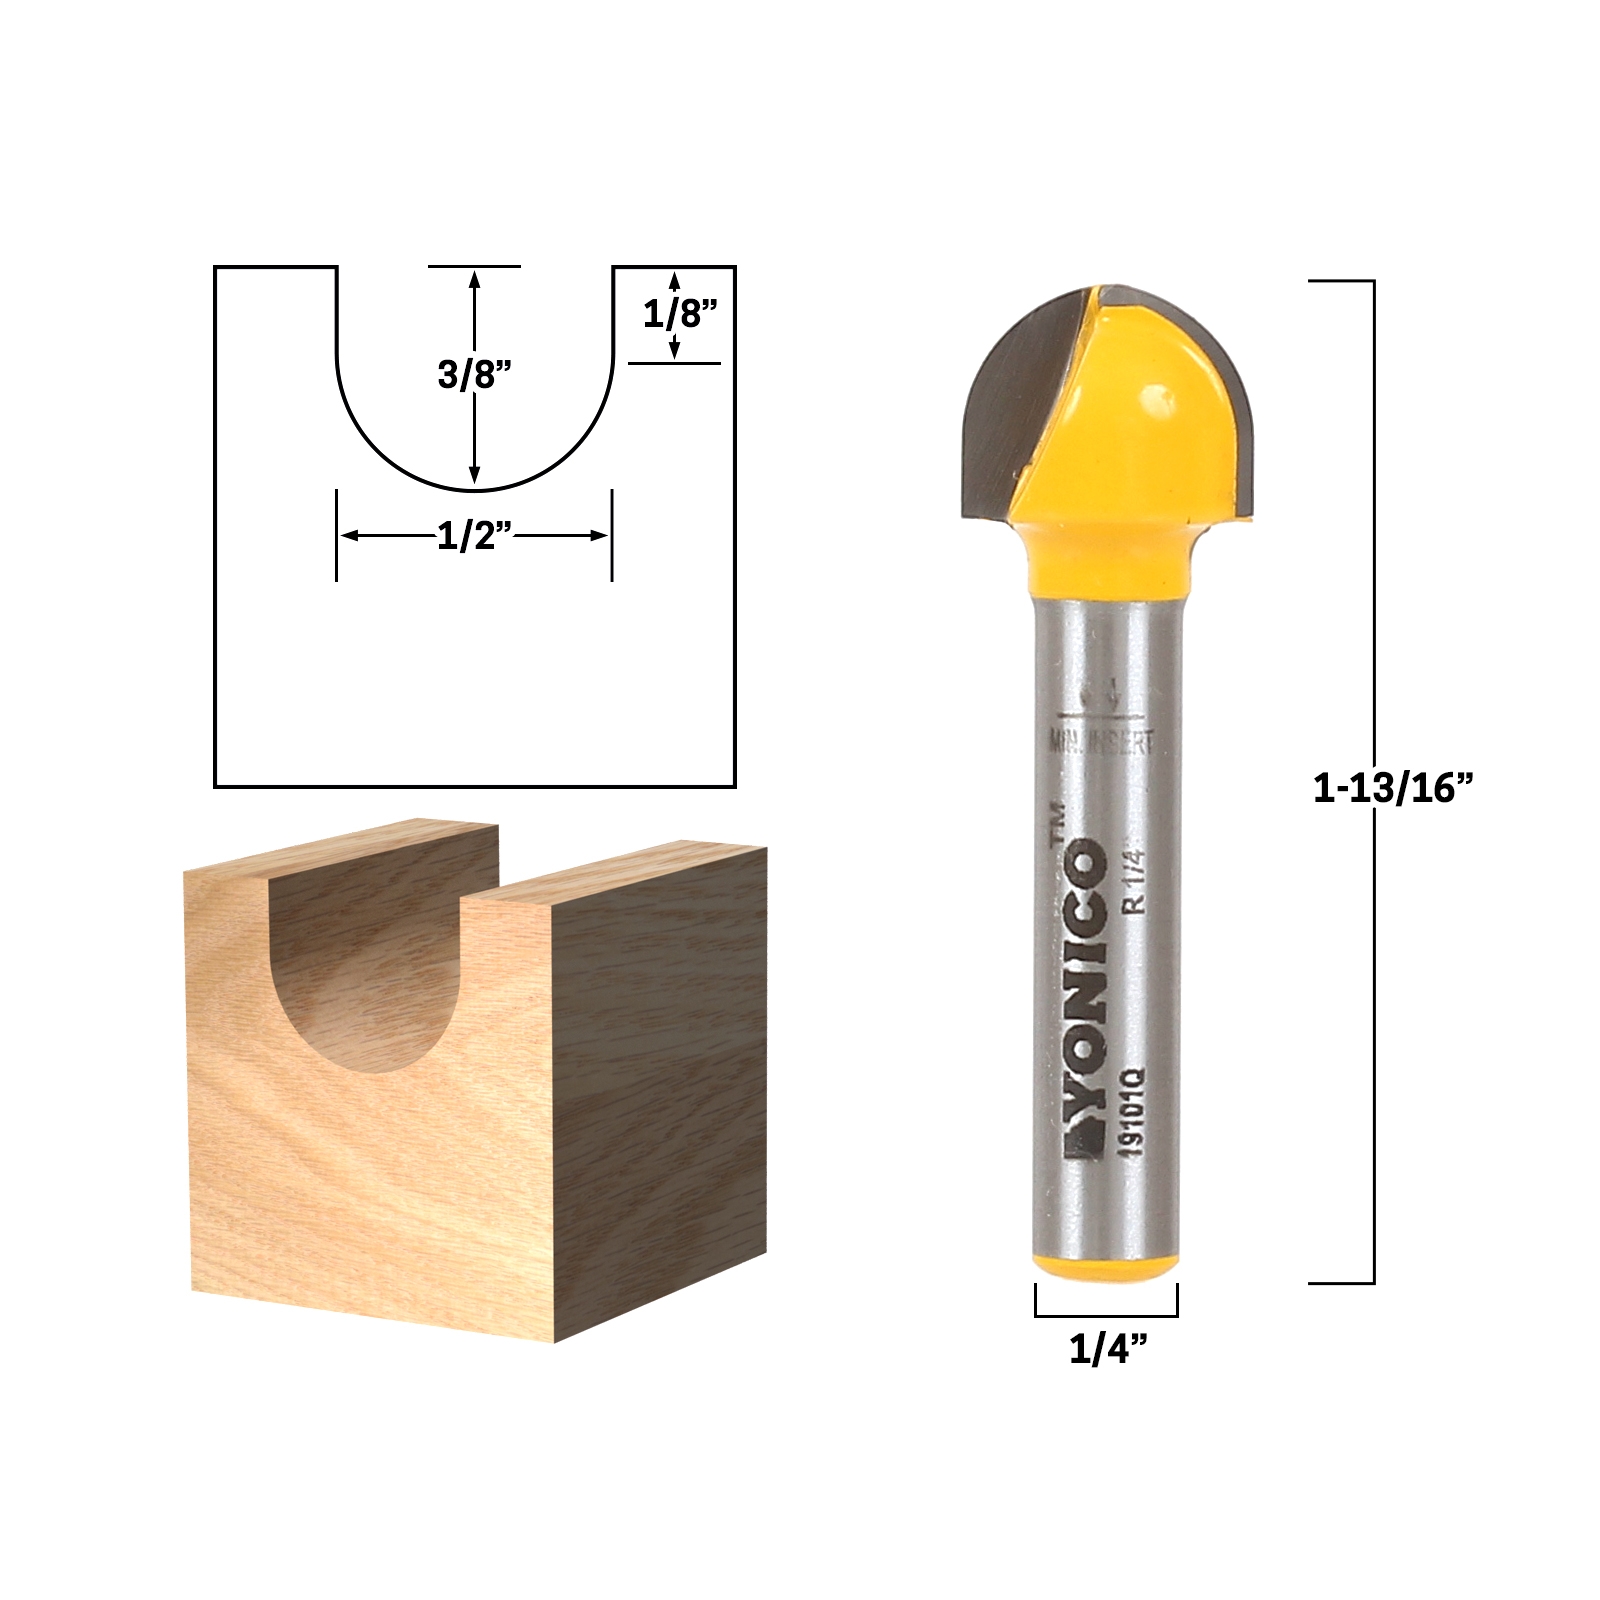 id:1d6 1f 91 4eb New Lon0167 1.6 Long Featured 1/4 x 1/2 reliable efficacy Two Flutes Core Box Router Bit for Woodwork 